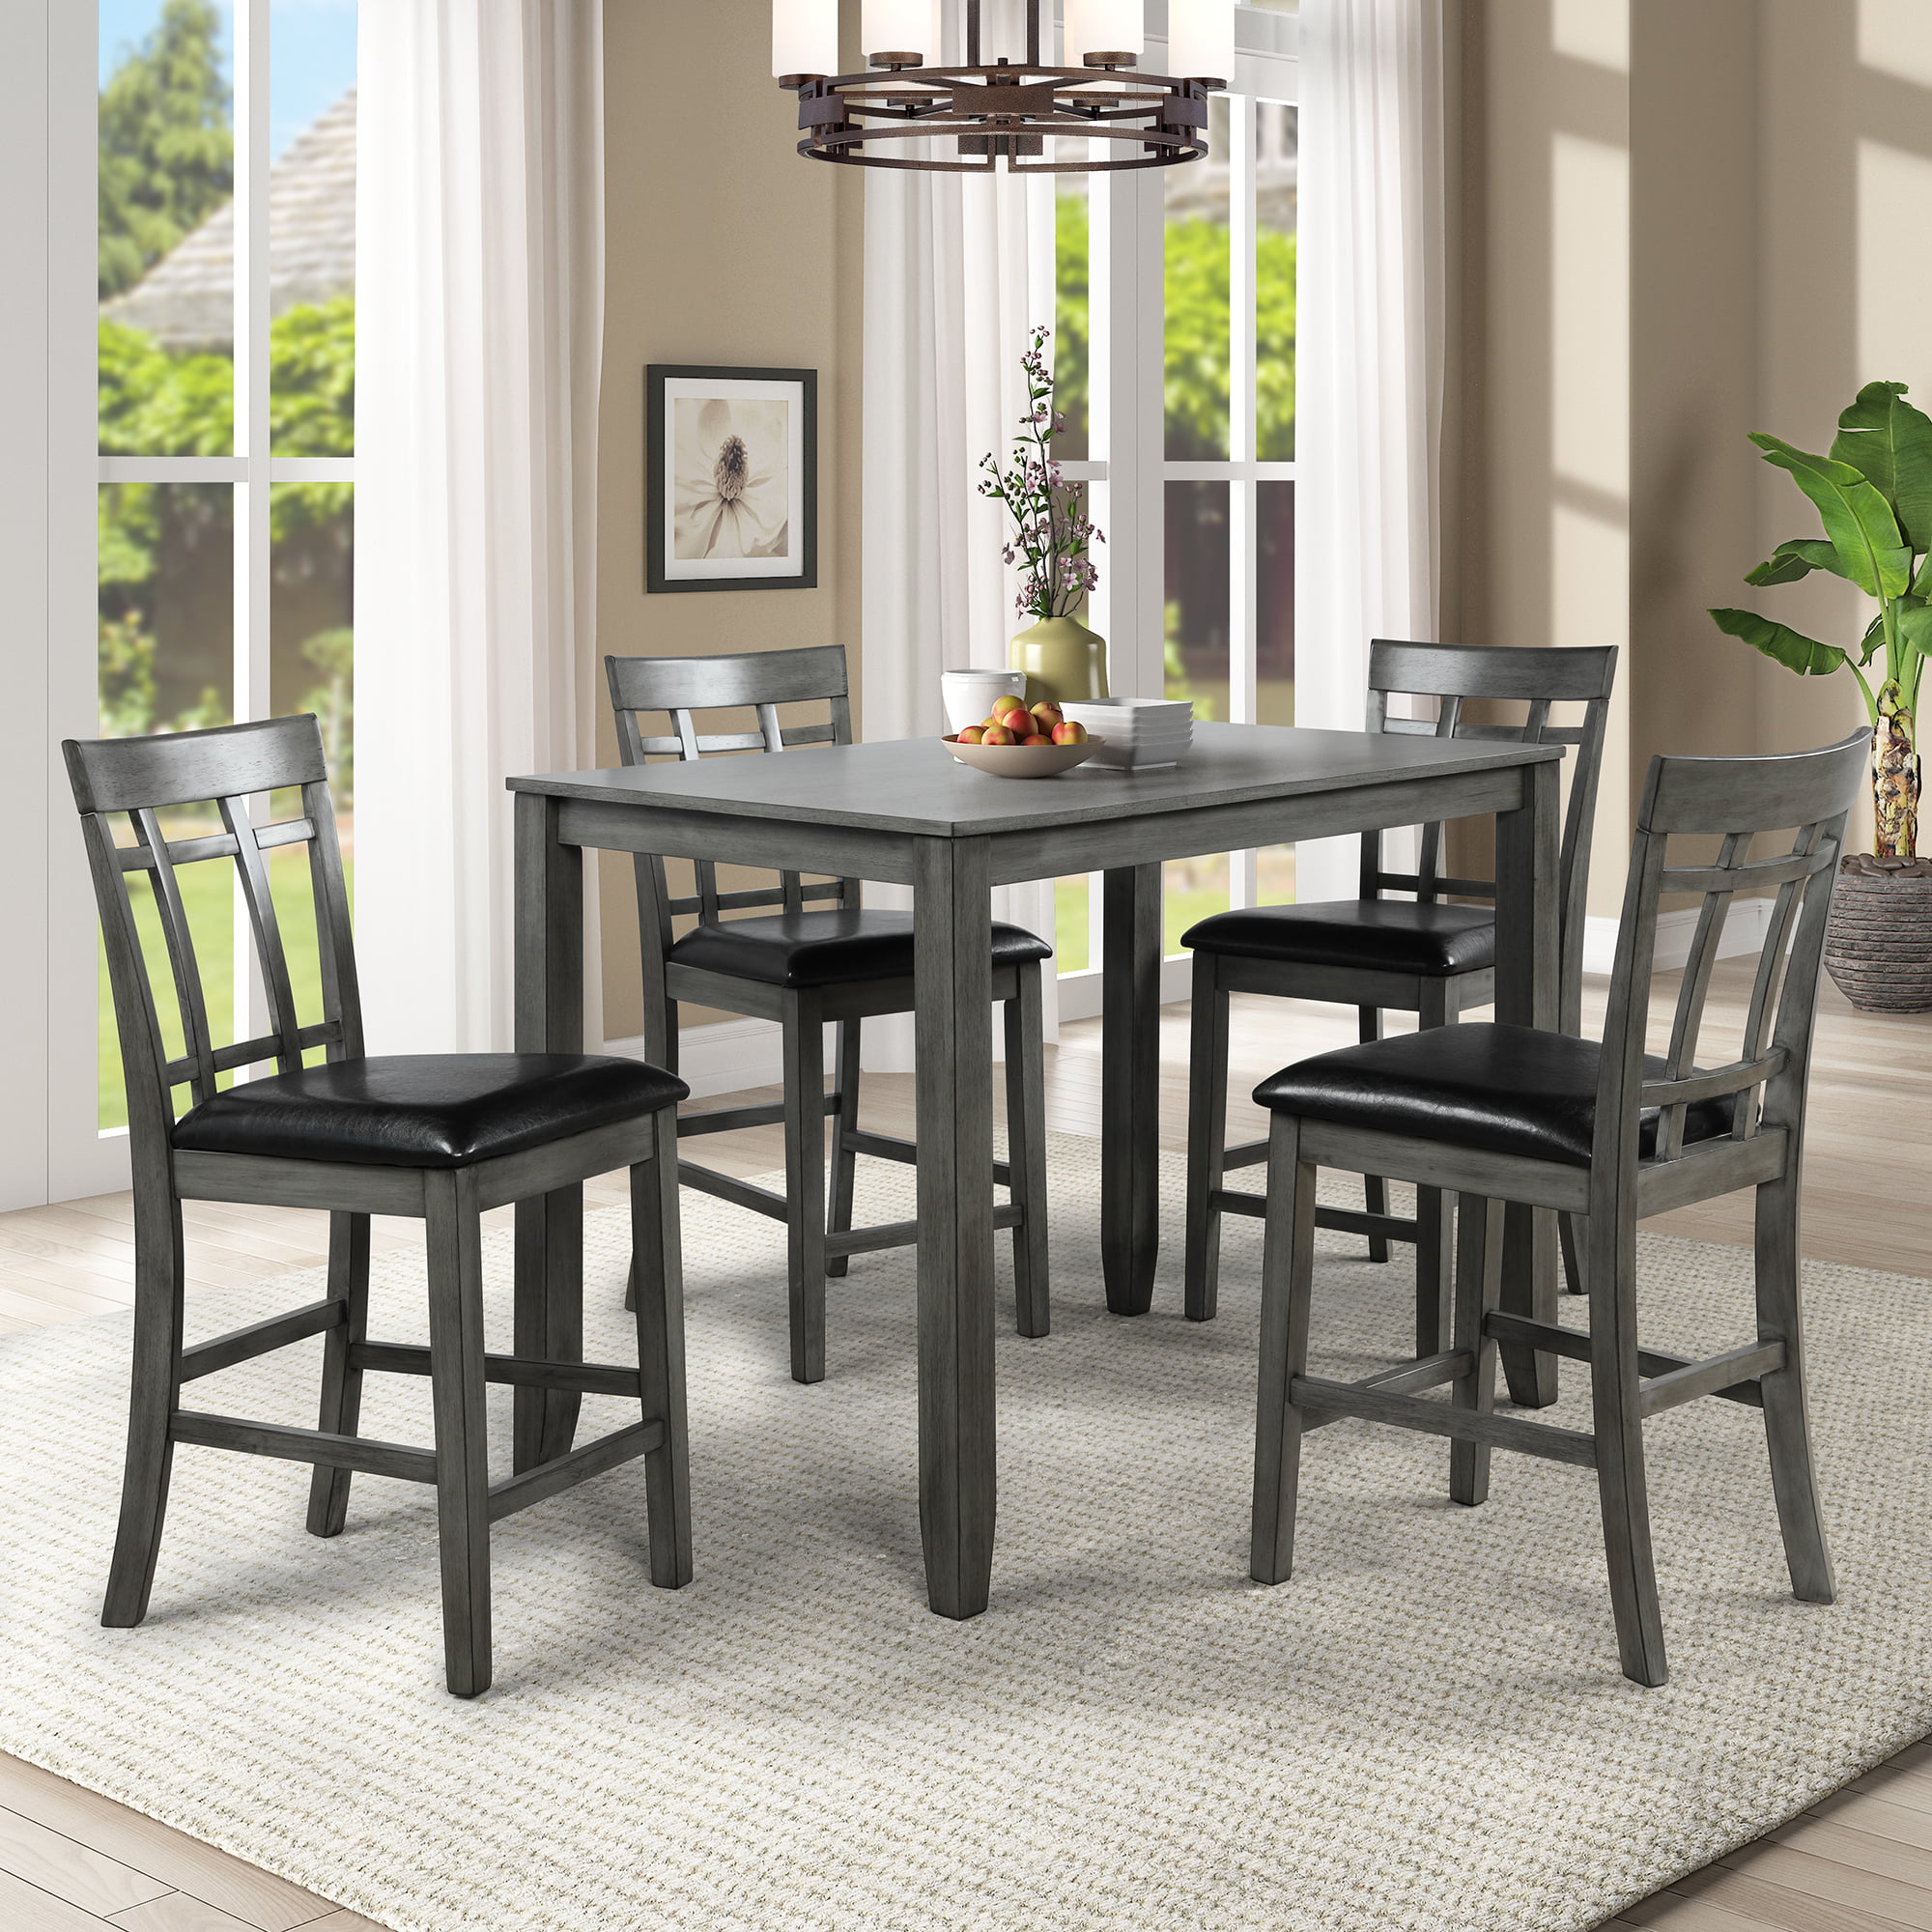 Dining Table Set for 4, BTMWAY 5Piece Solid Wood Kitchen Table Set ...